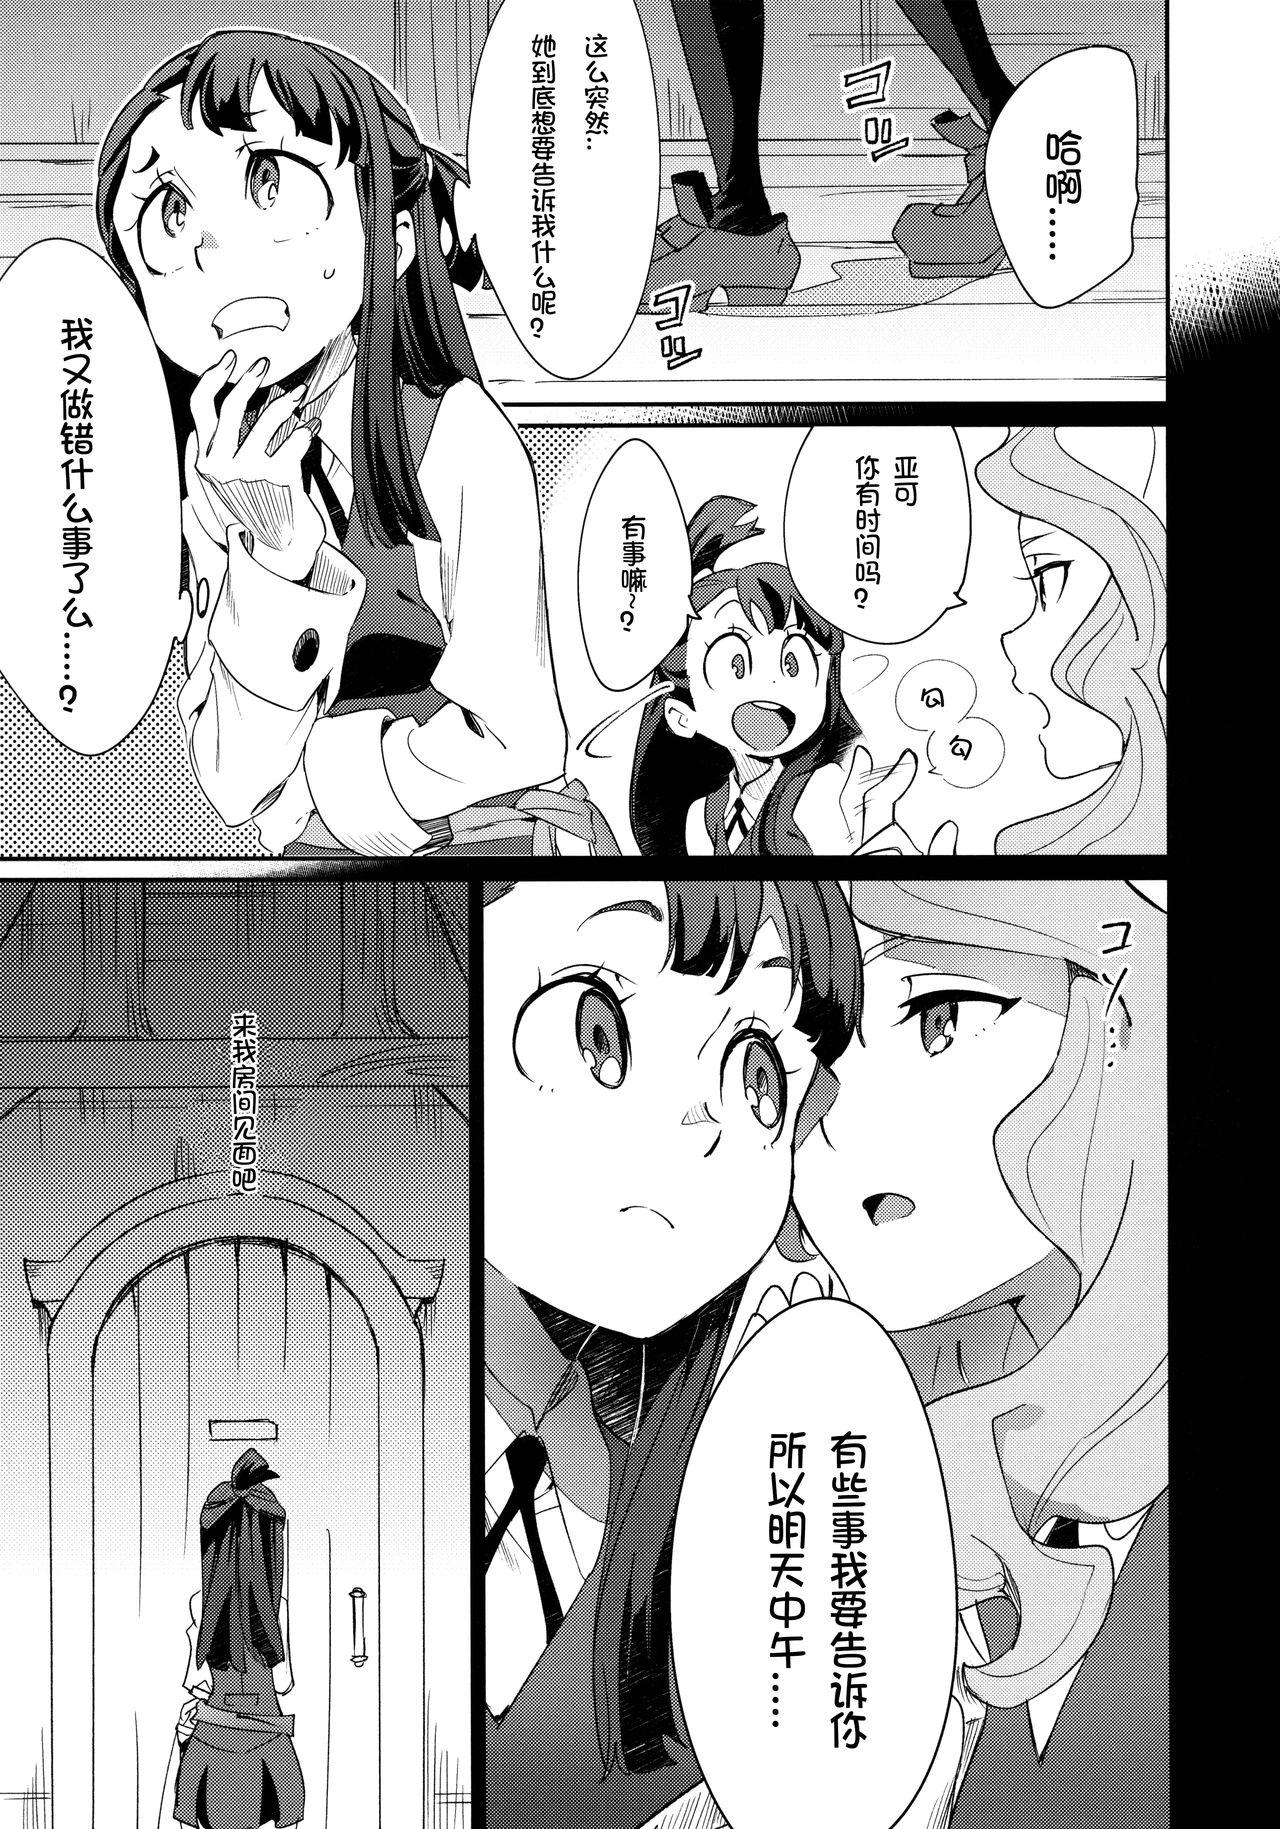 Missionary Position Porn xxx - Little witch academia Culona - Page 6